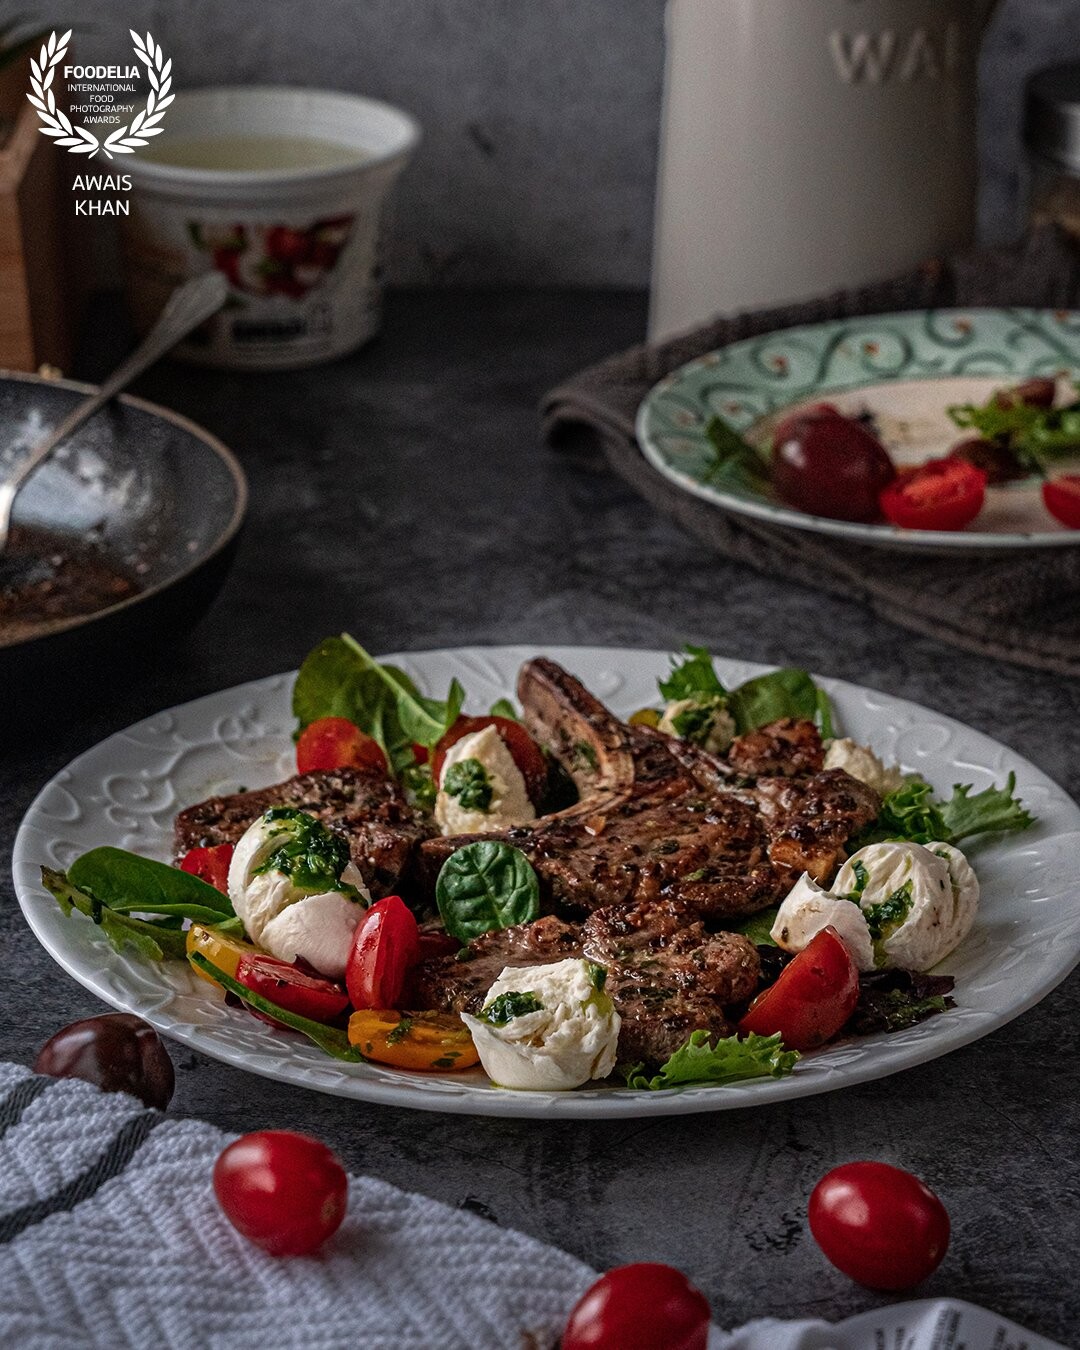 Grilled Lamb, tomato bocconcini salad, and herb oil all dressed up for dinner. I wanted the salad to pop colour into this picture without taking up too much space.